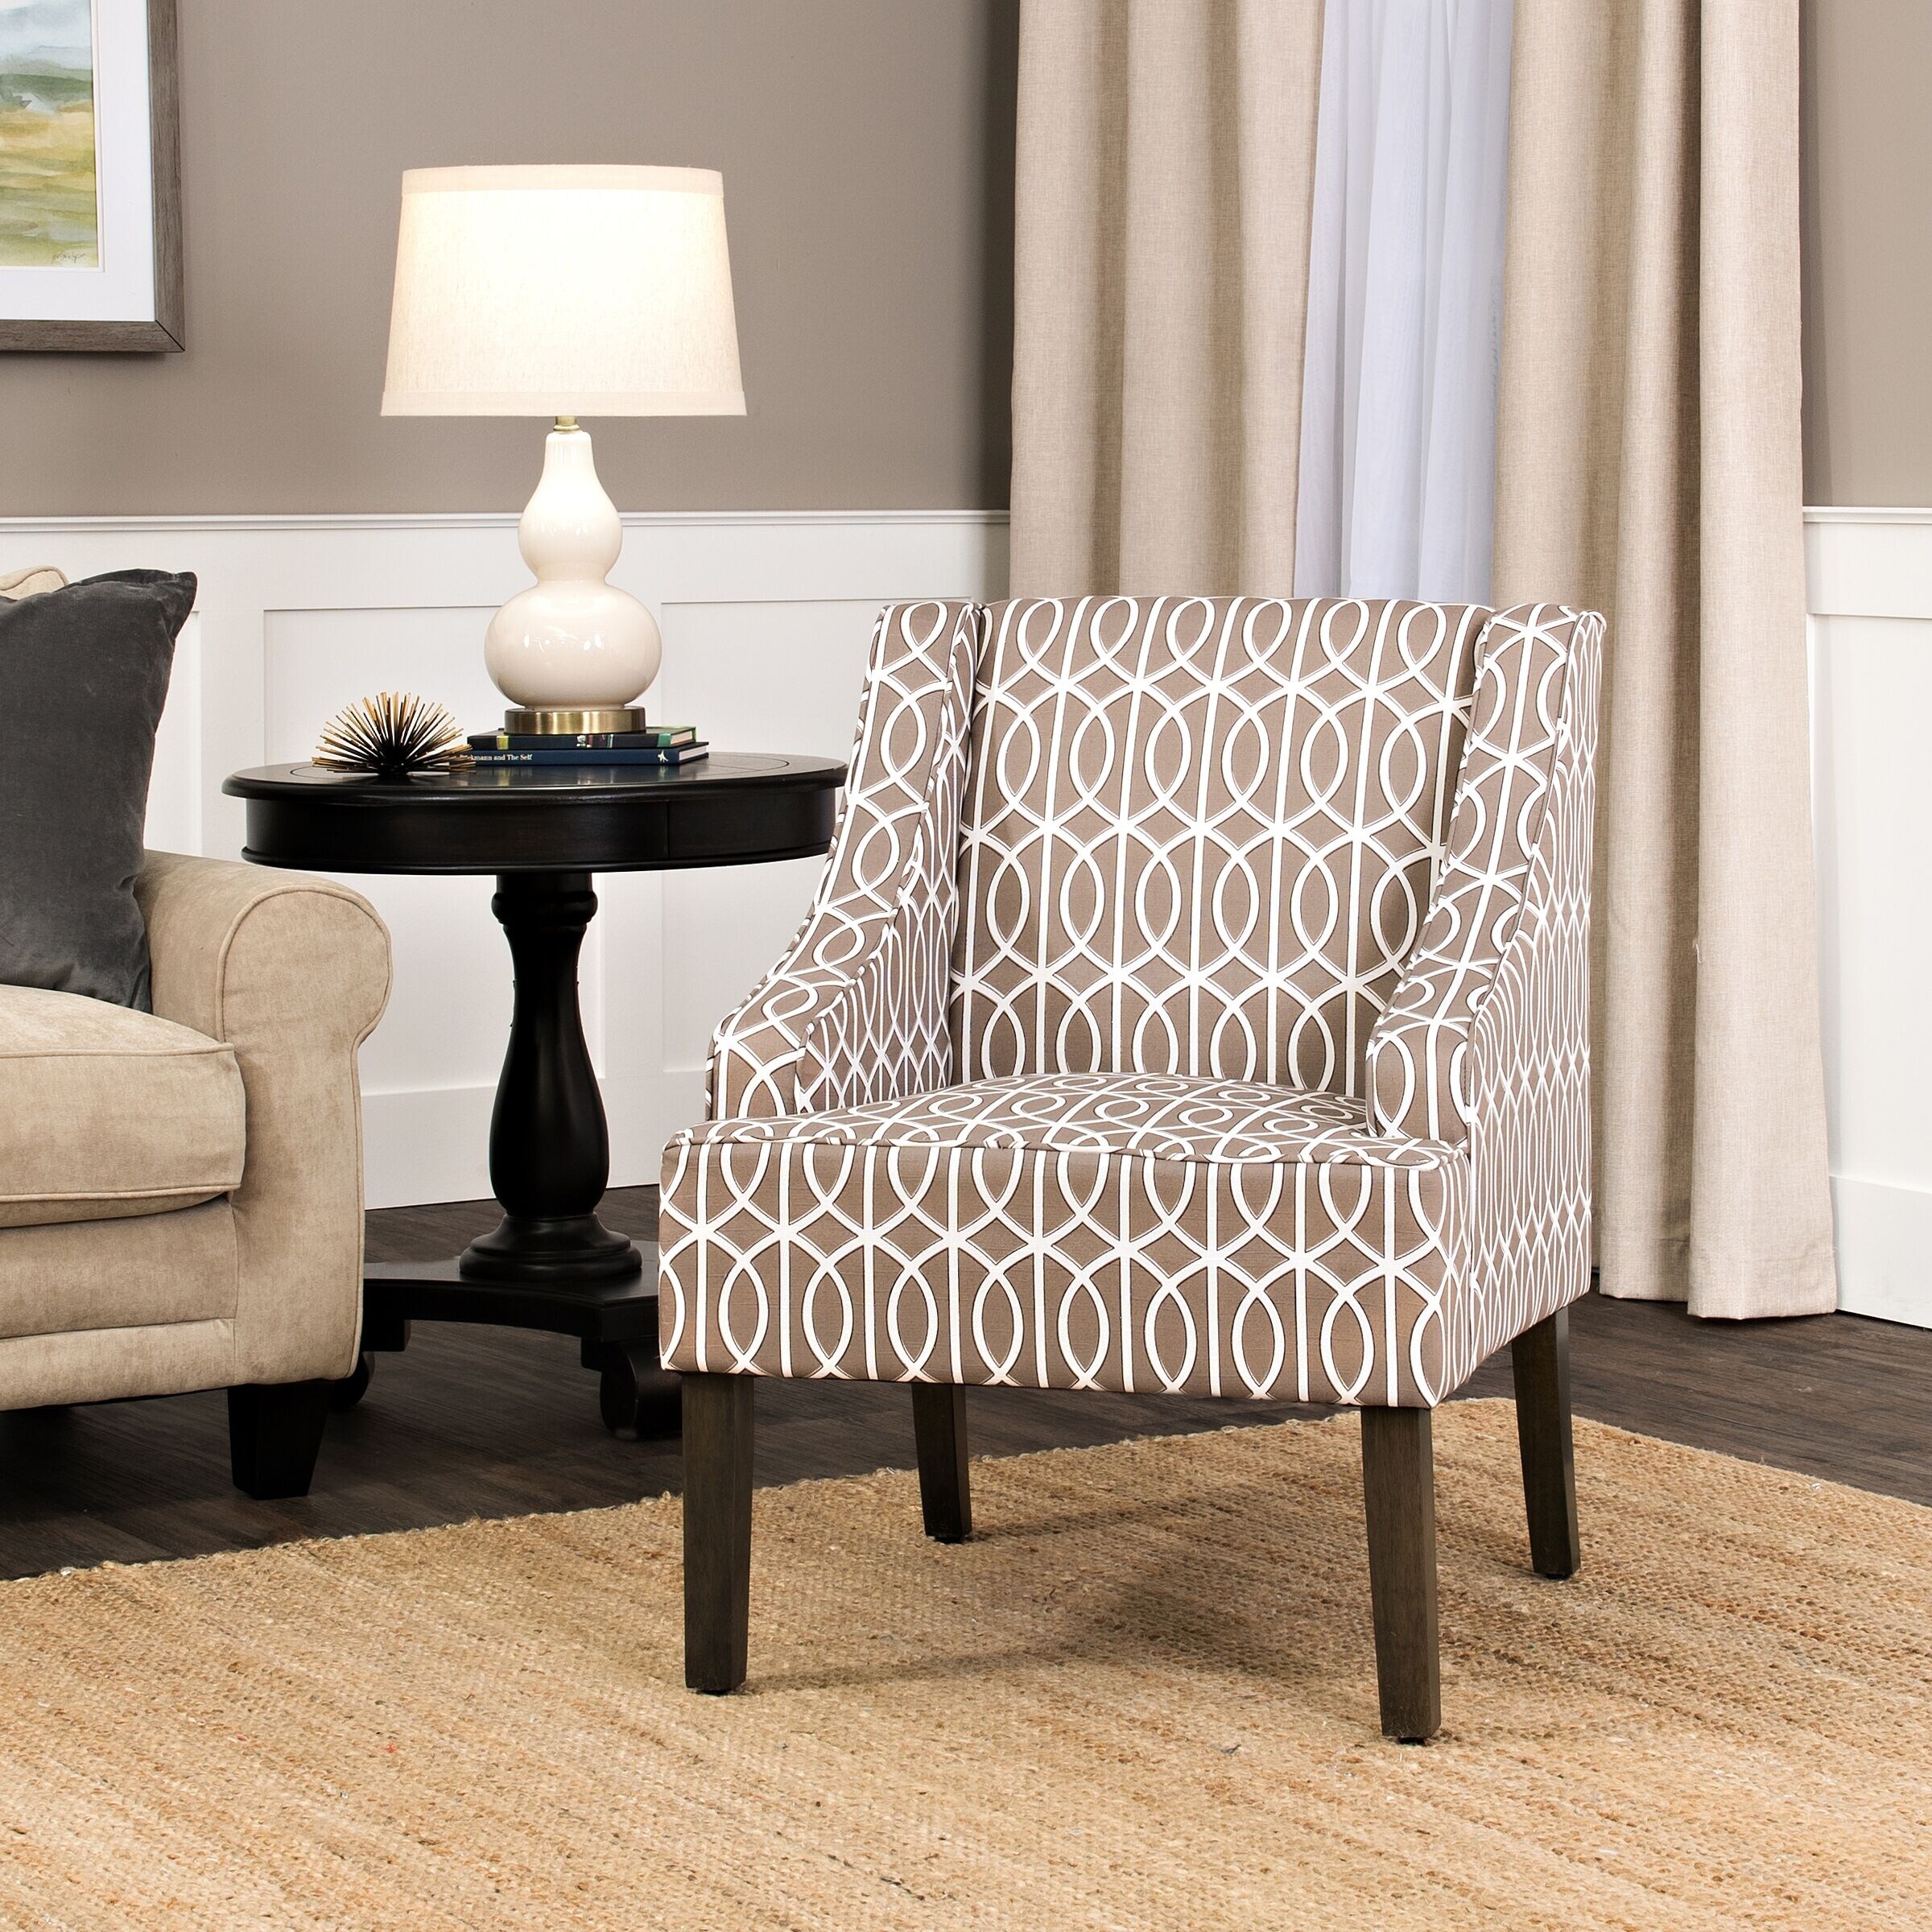 Swoop Arm Accent Chair - Homepop Classic Swoop Arm Accent Chair Buy